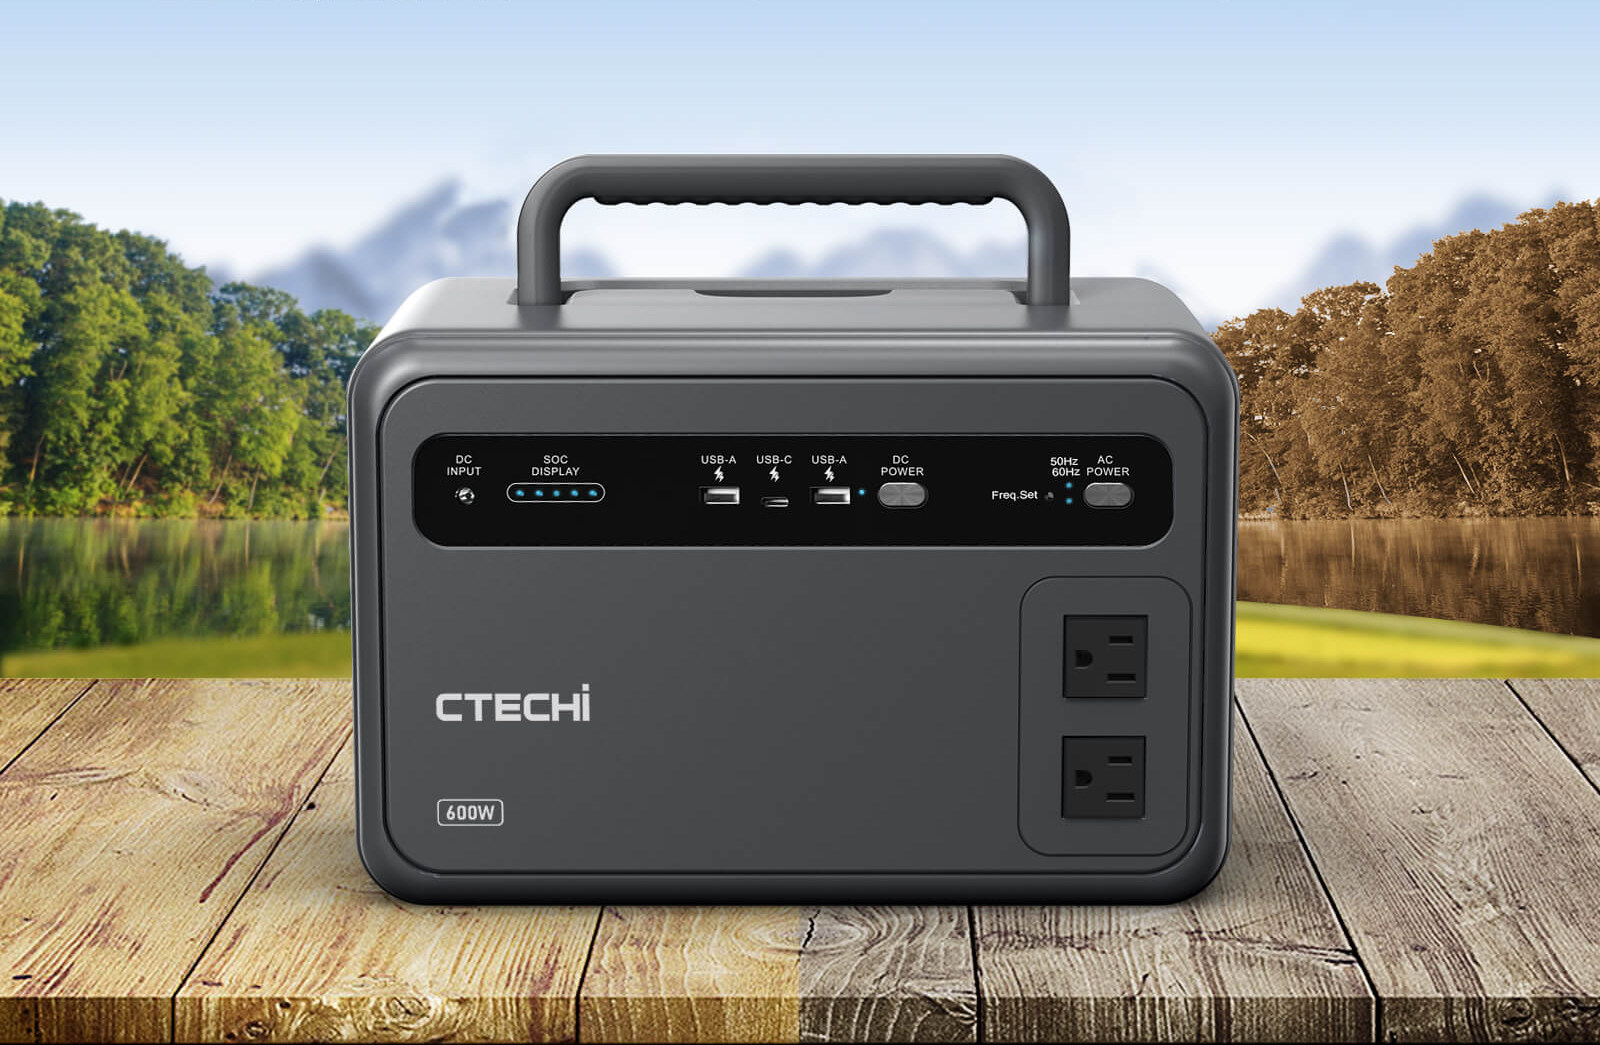 CTECHi GT600 691Wh Portable Power Station